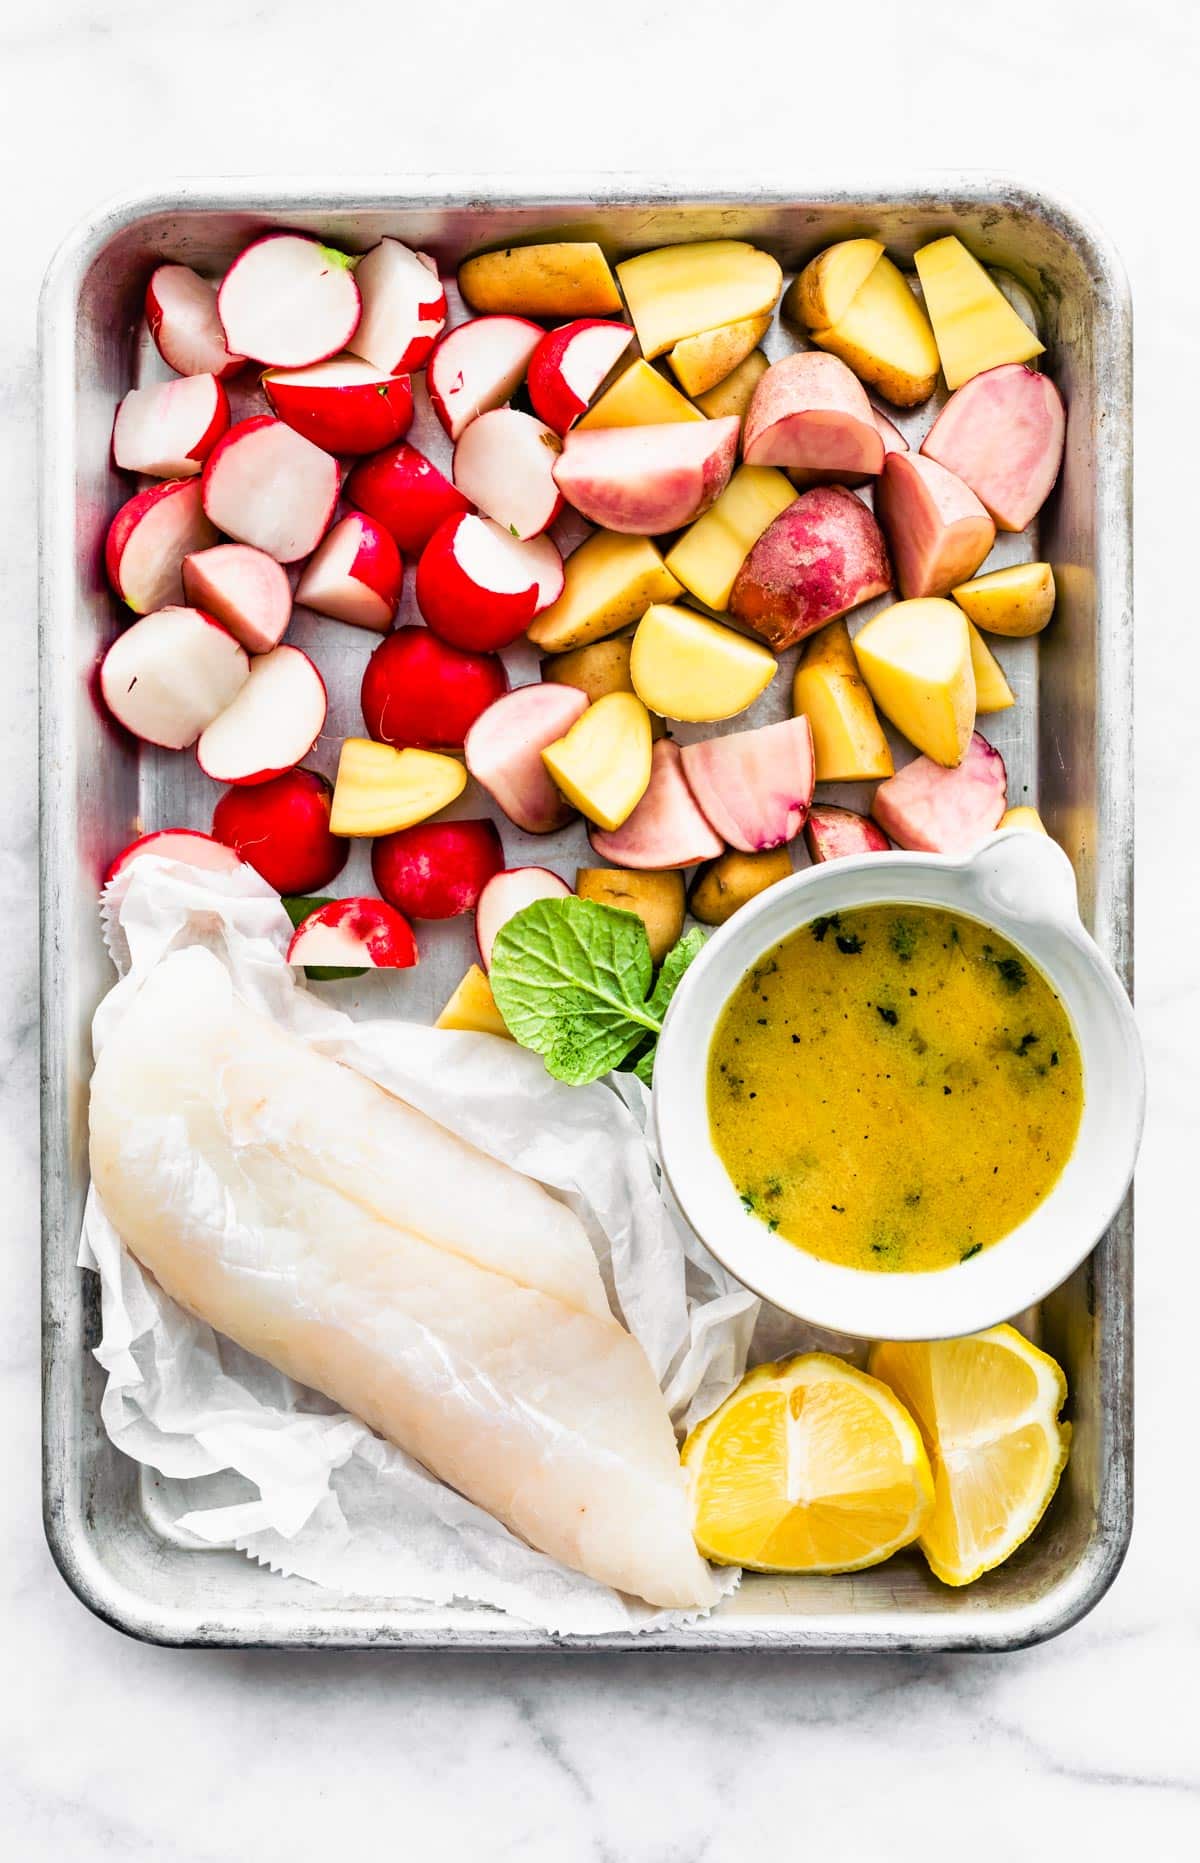 Easy Baked Fish and Vegetables ingredients on a baking sheet - fish fillet, lemons, potatoes, radishes, and a mustard sauce.